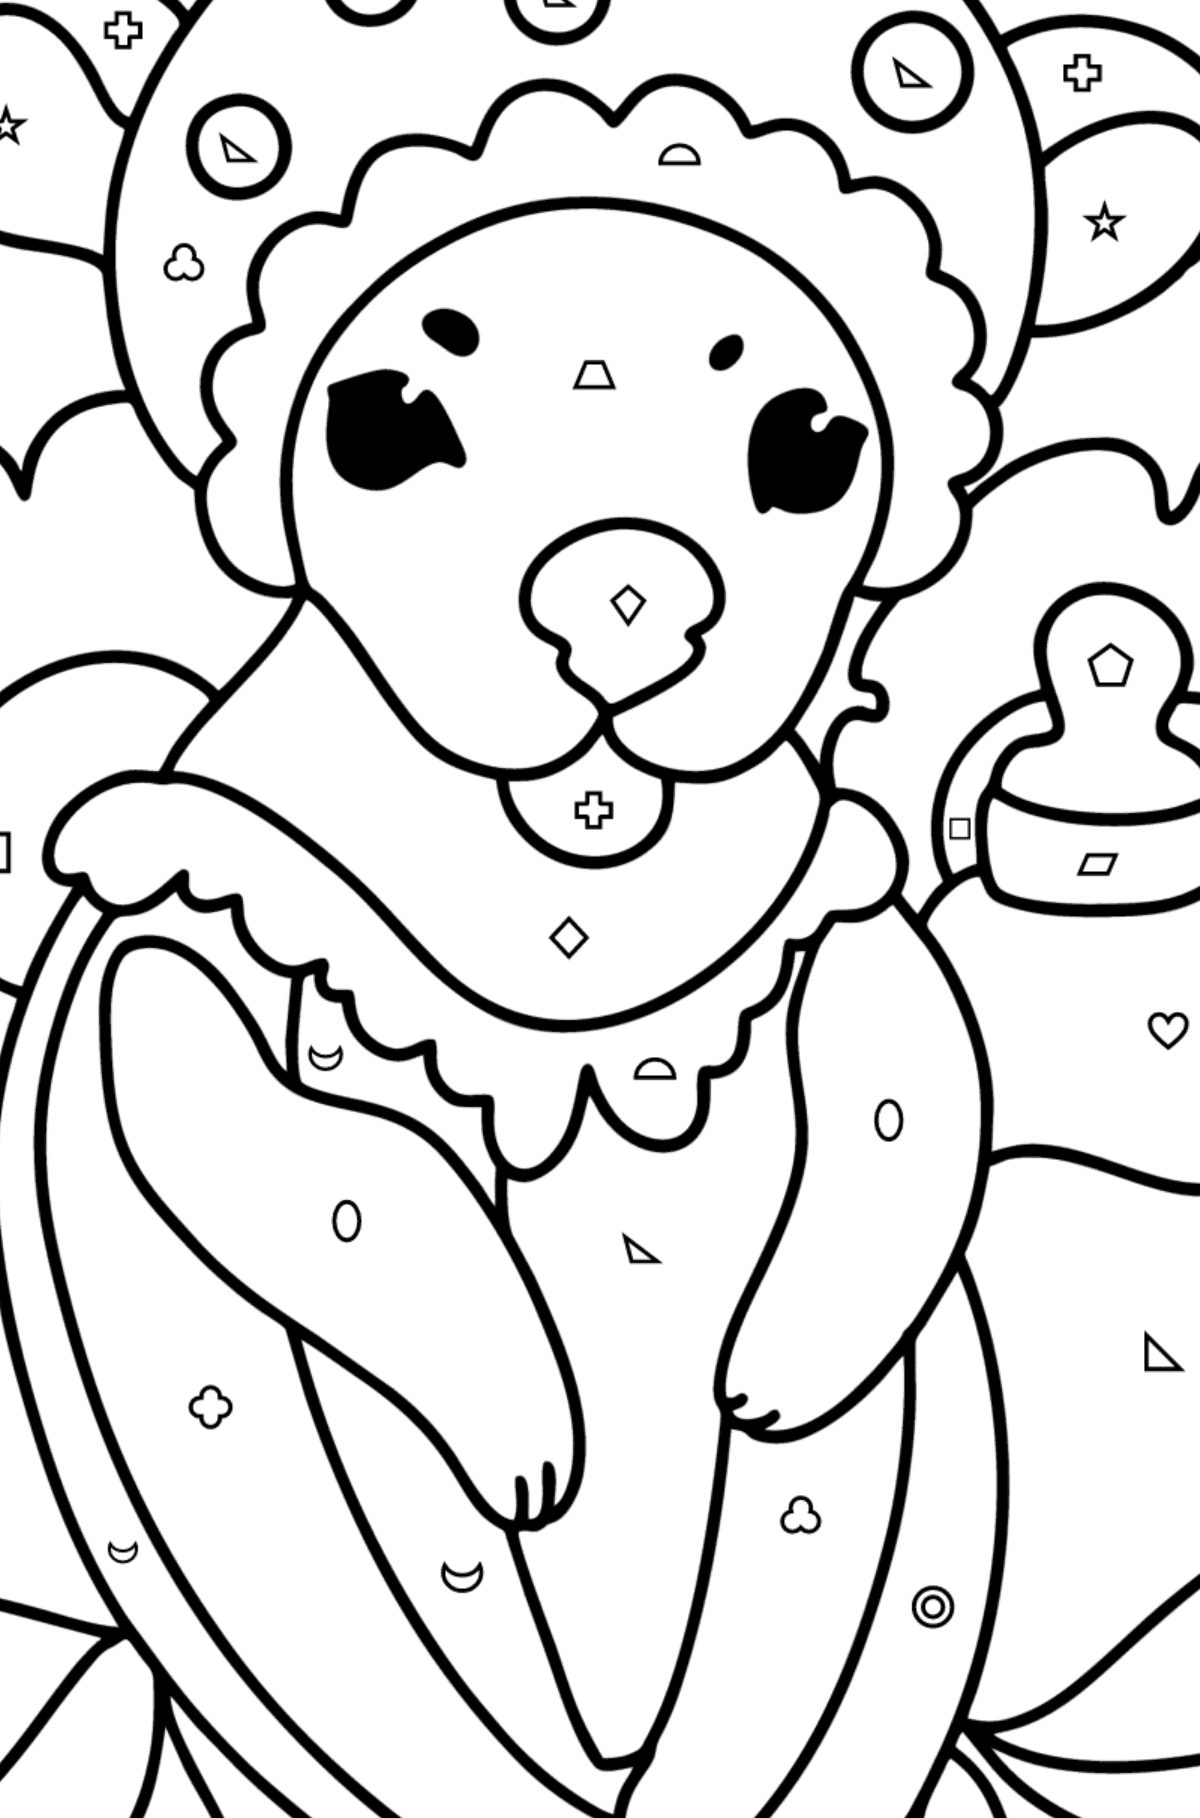 Complex Coloring page - Cartoon Baby Kangaroo - Coloring by Geometric Shapes for Kids